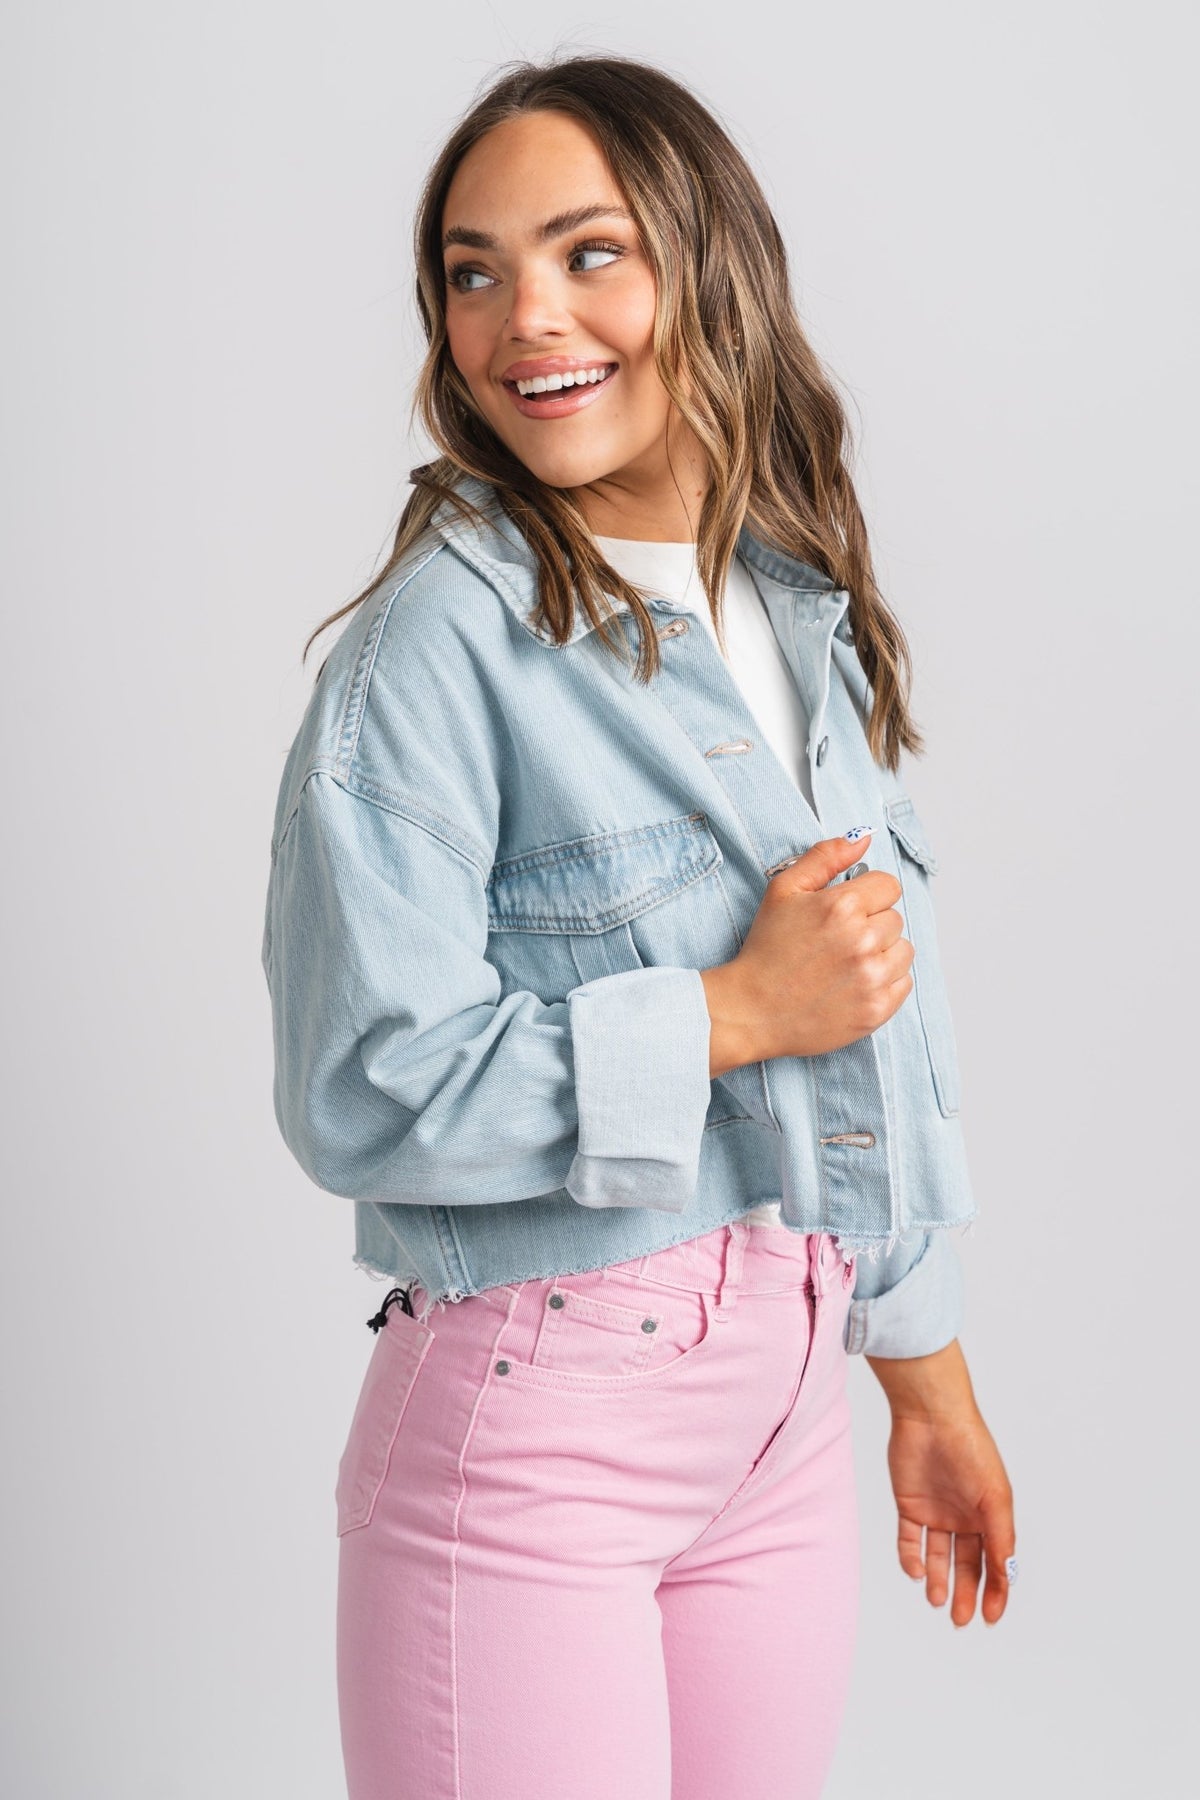 Cropped denim jacket light blue - Stylish jacket - Cute Easter Outfits at Lush Fashion Lounge Boutique in Oklahoma